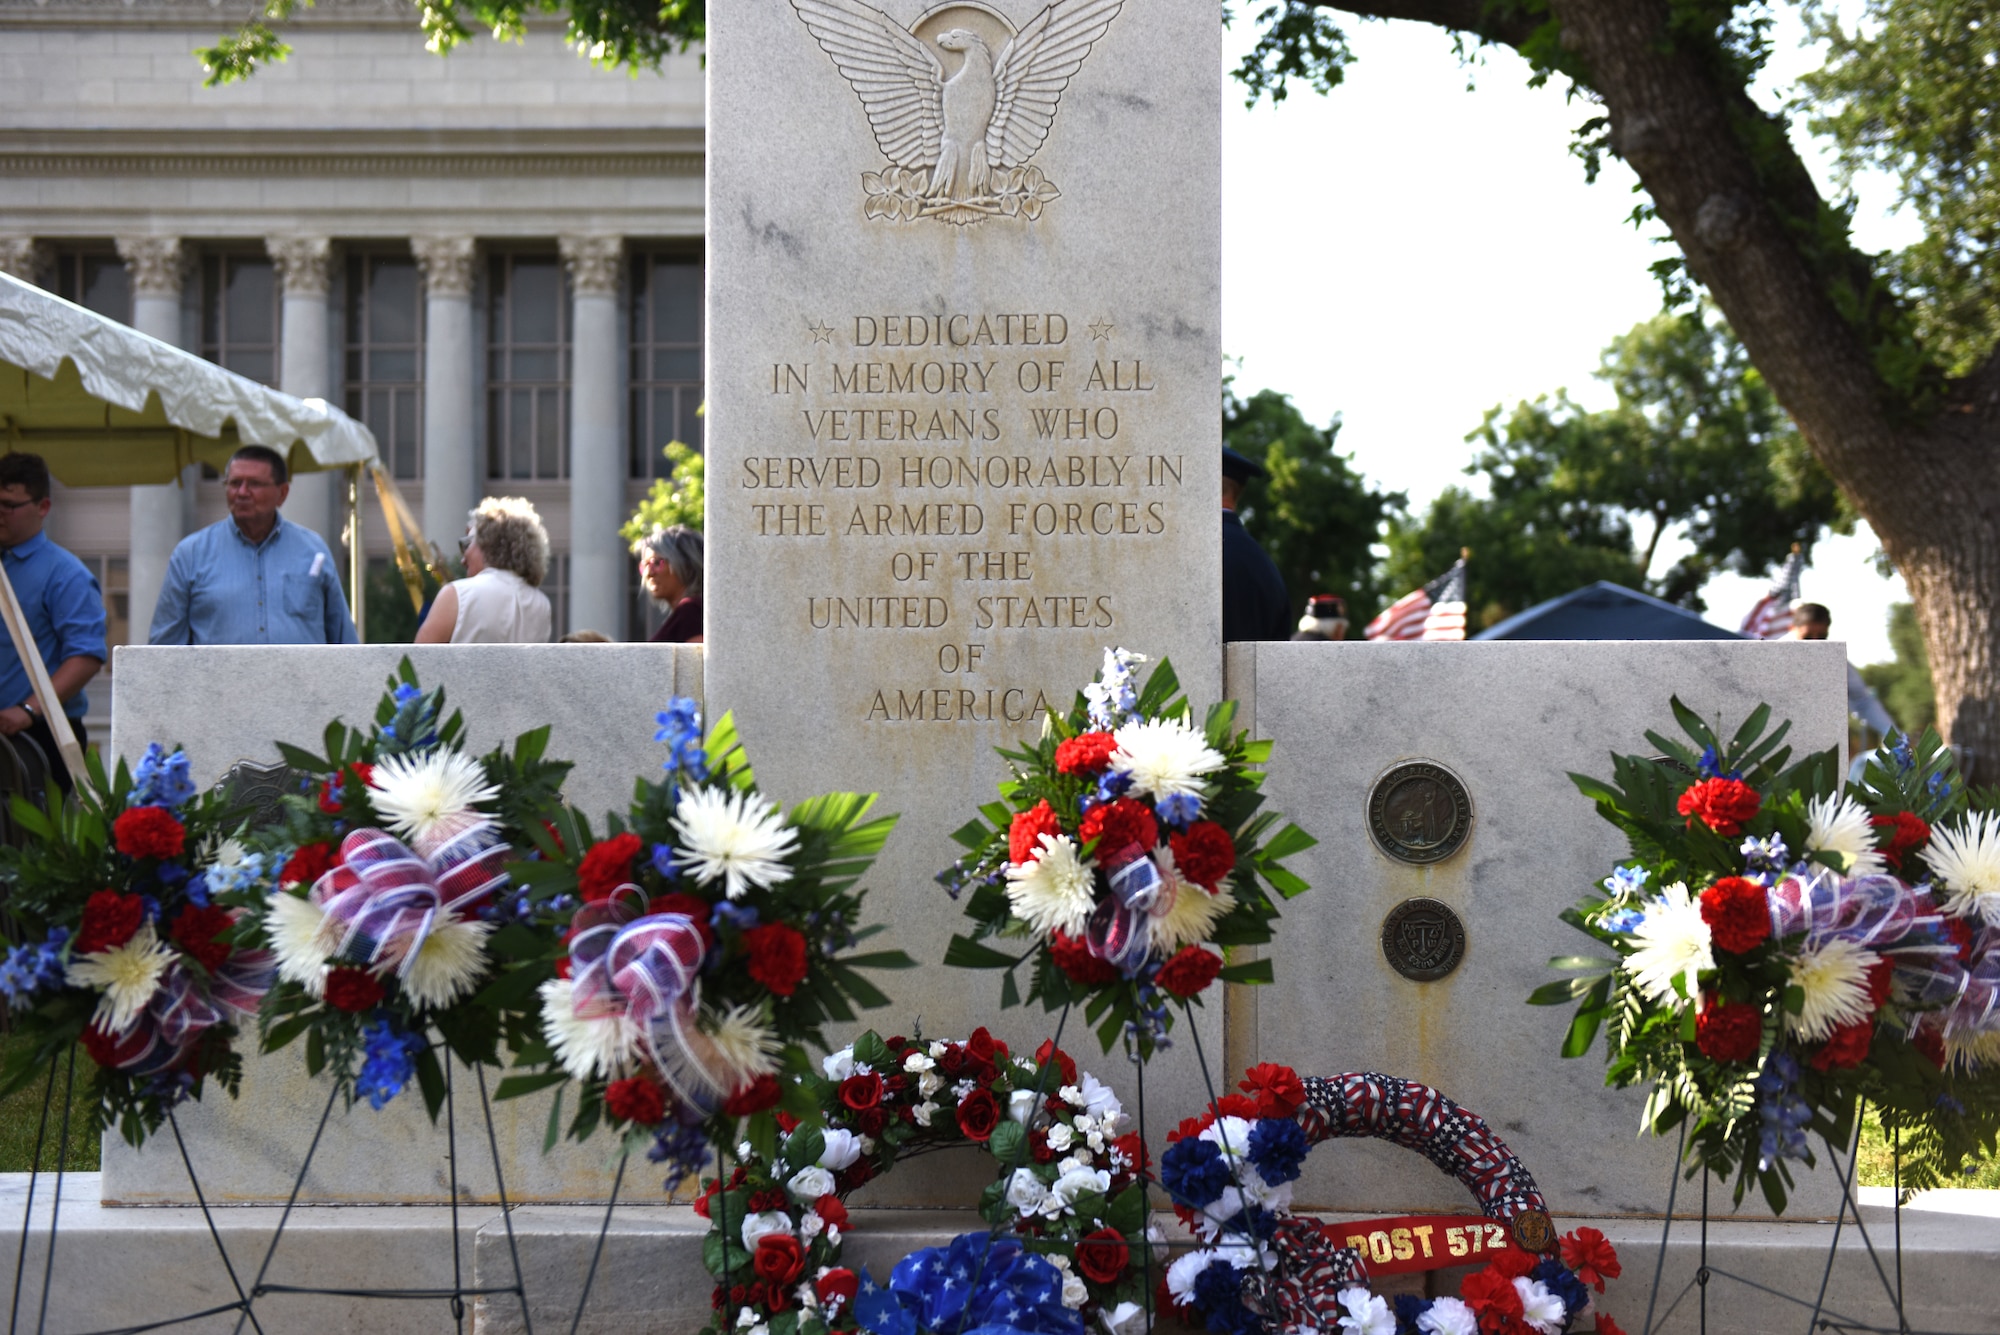 Wreaths are on display from San Angelo Veterans Organizations and Affiliates in front of the All Veterans Memorial in front of the Tom Greenp County Courthouse in San Angelo, Texas, May 27, 2019. The memorial is dedicated in memory of all the veterans who served honorably in the armed forces of the United States of America. (U.S Air Force photo by Senior Airman Seraiah Hines/Released)